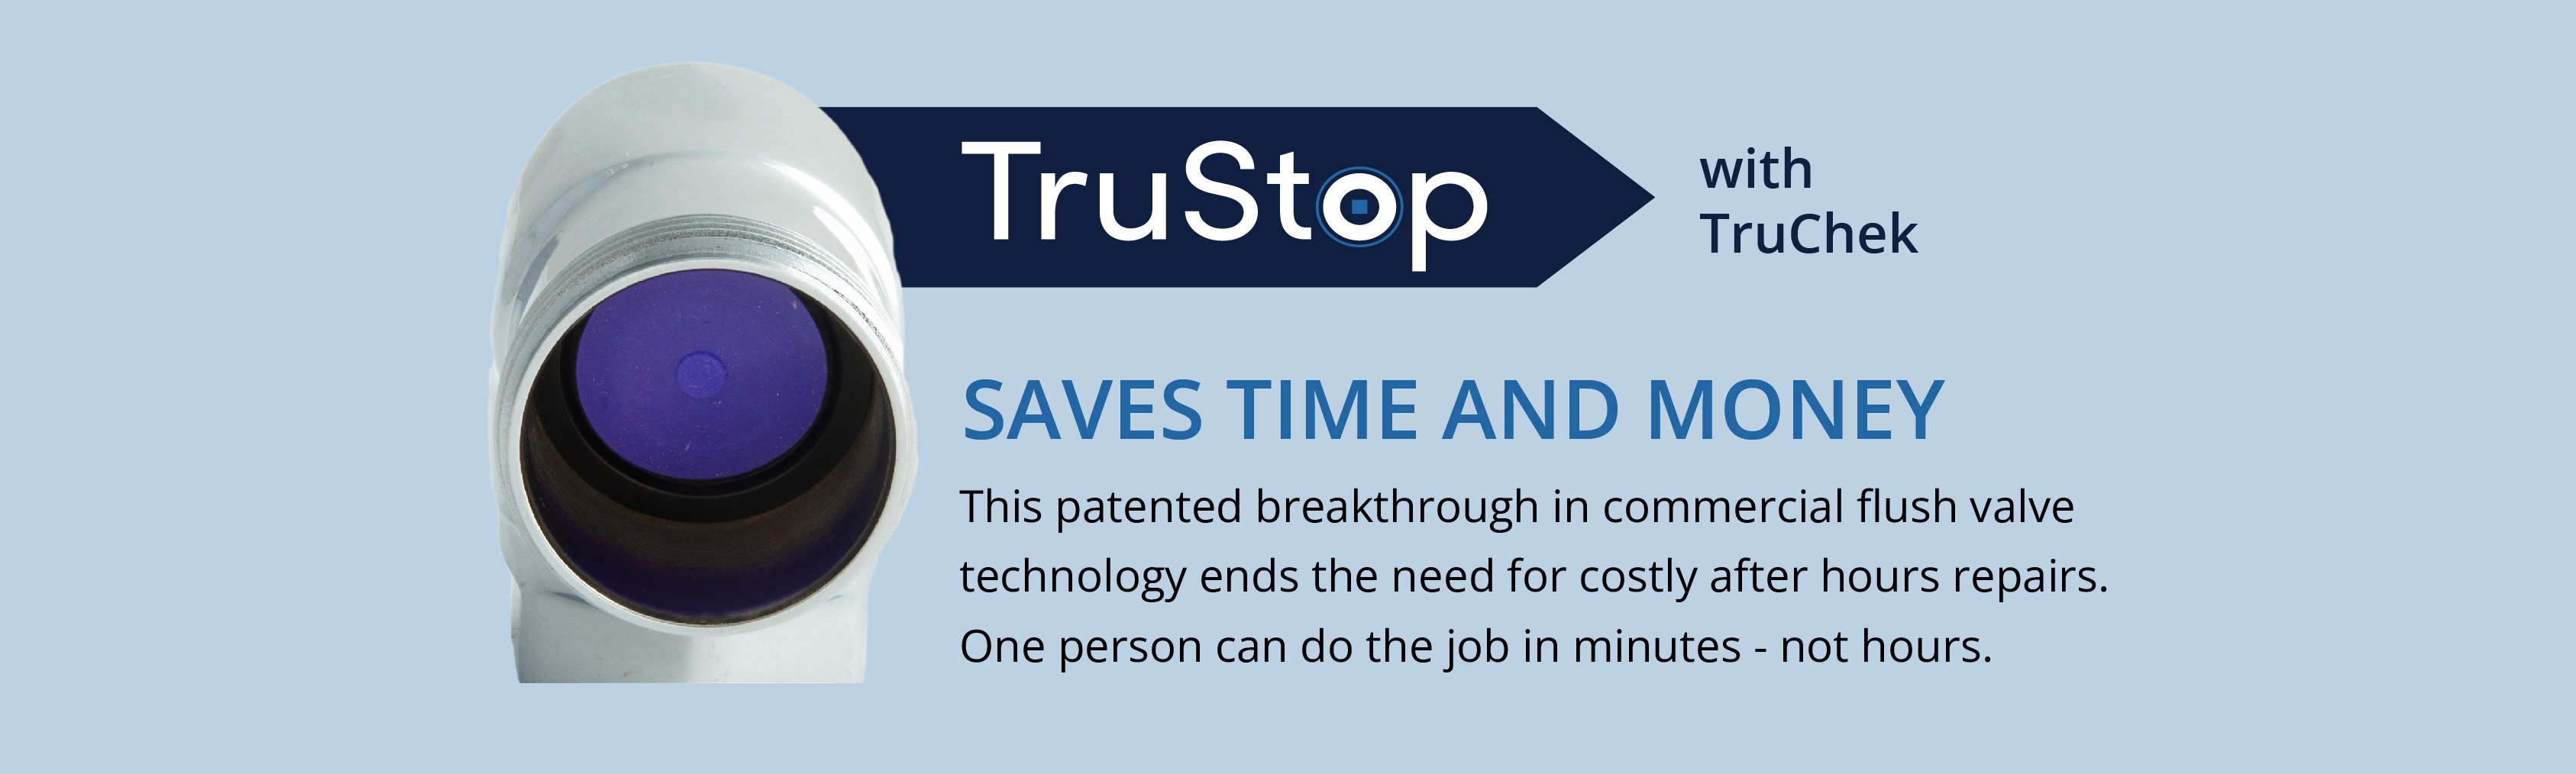 img-block_trustop-save-time-and-money